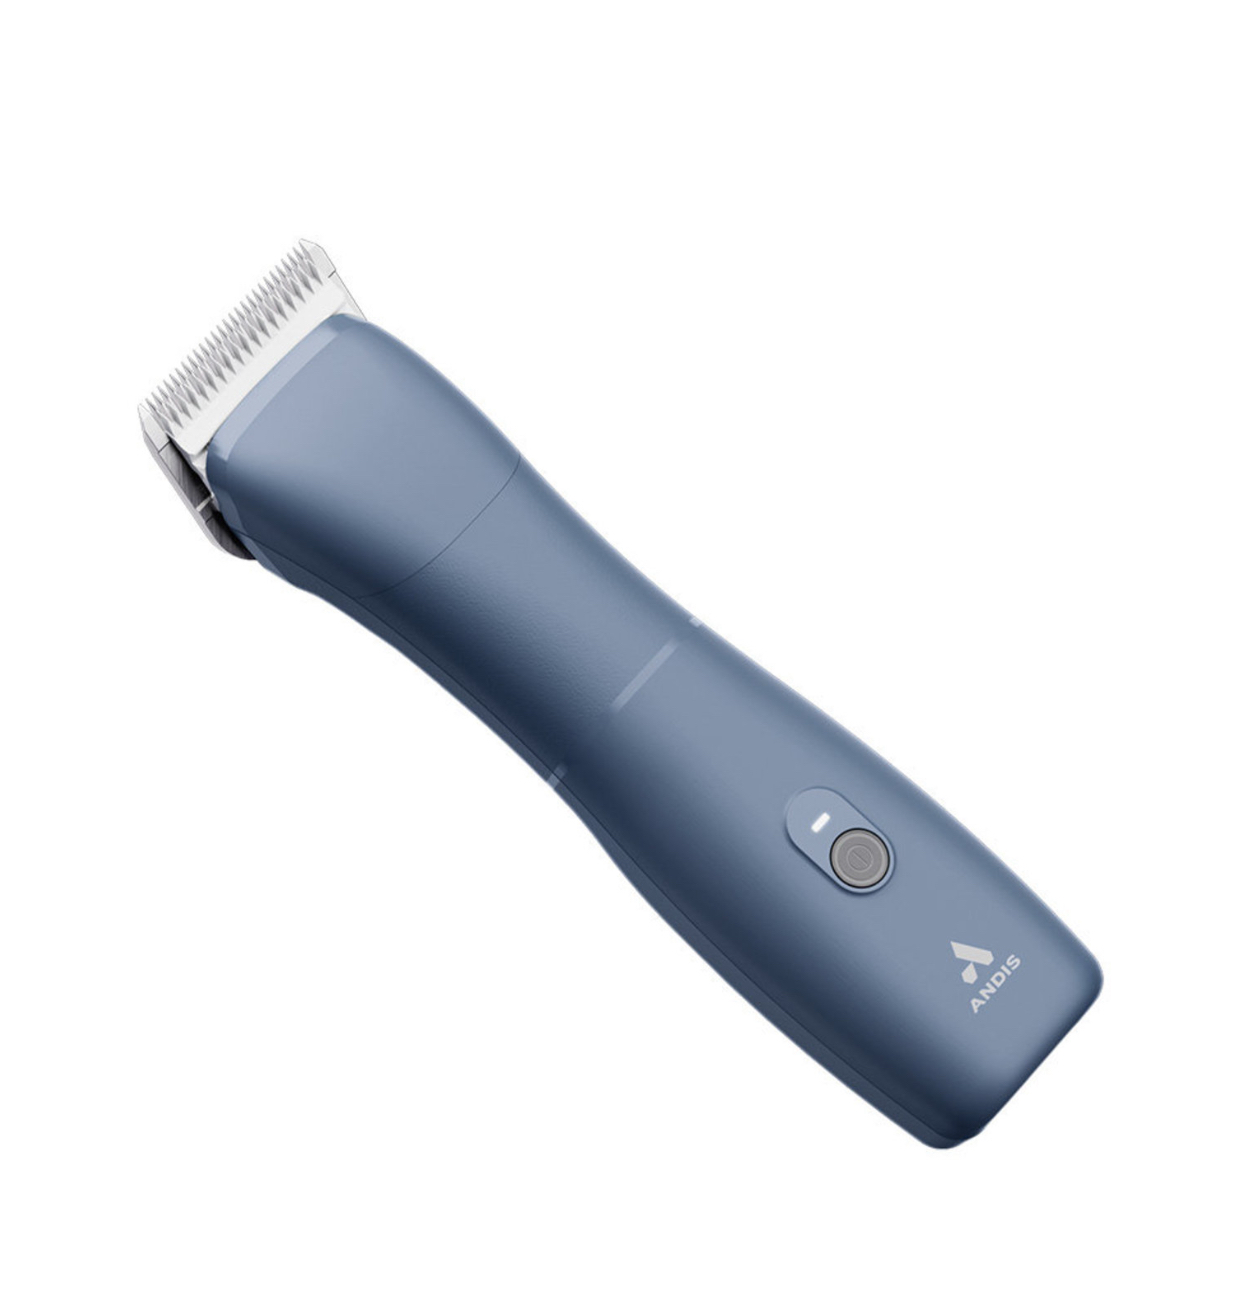 Andis Emerge cord/cordless clipper